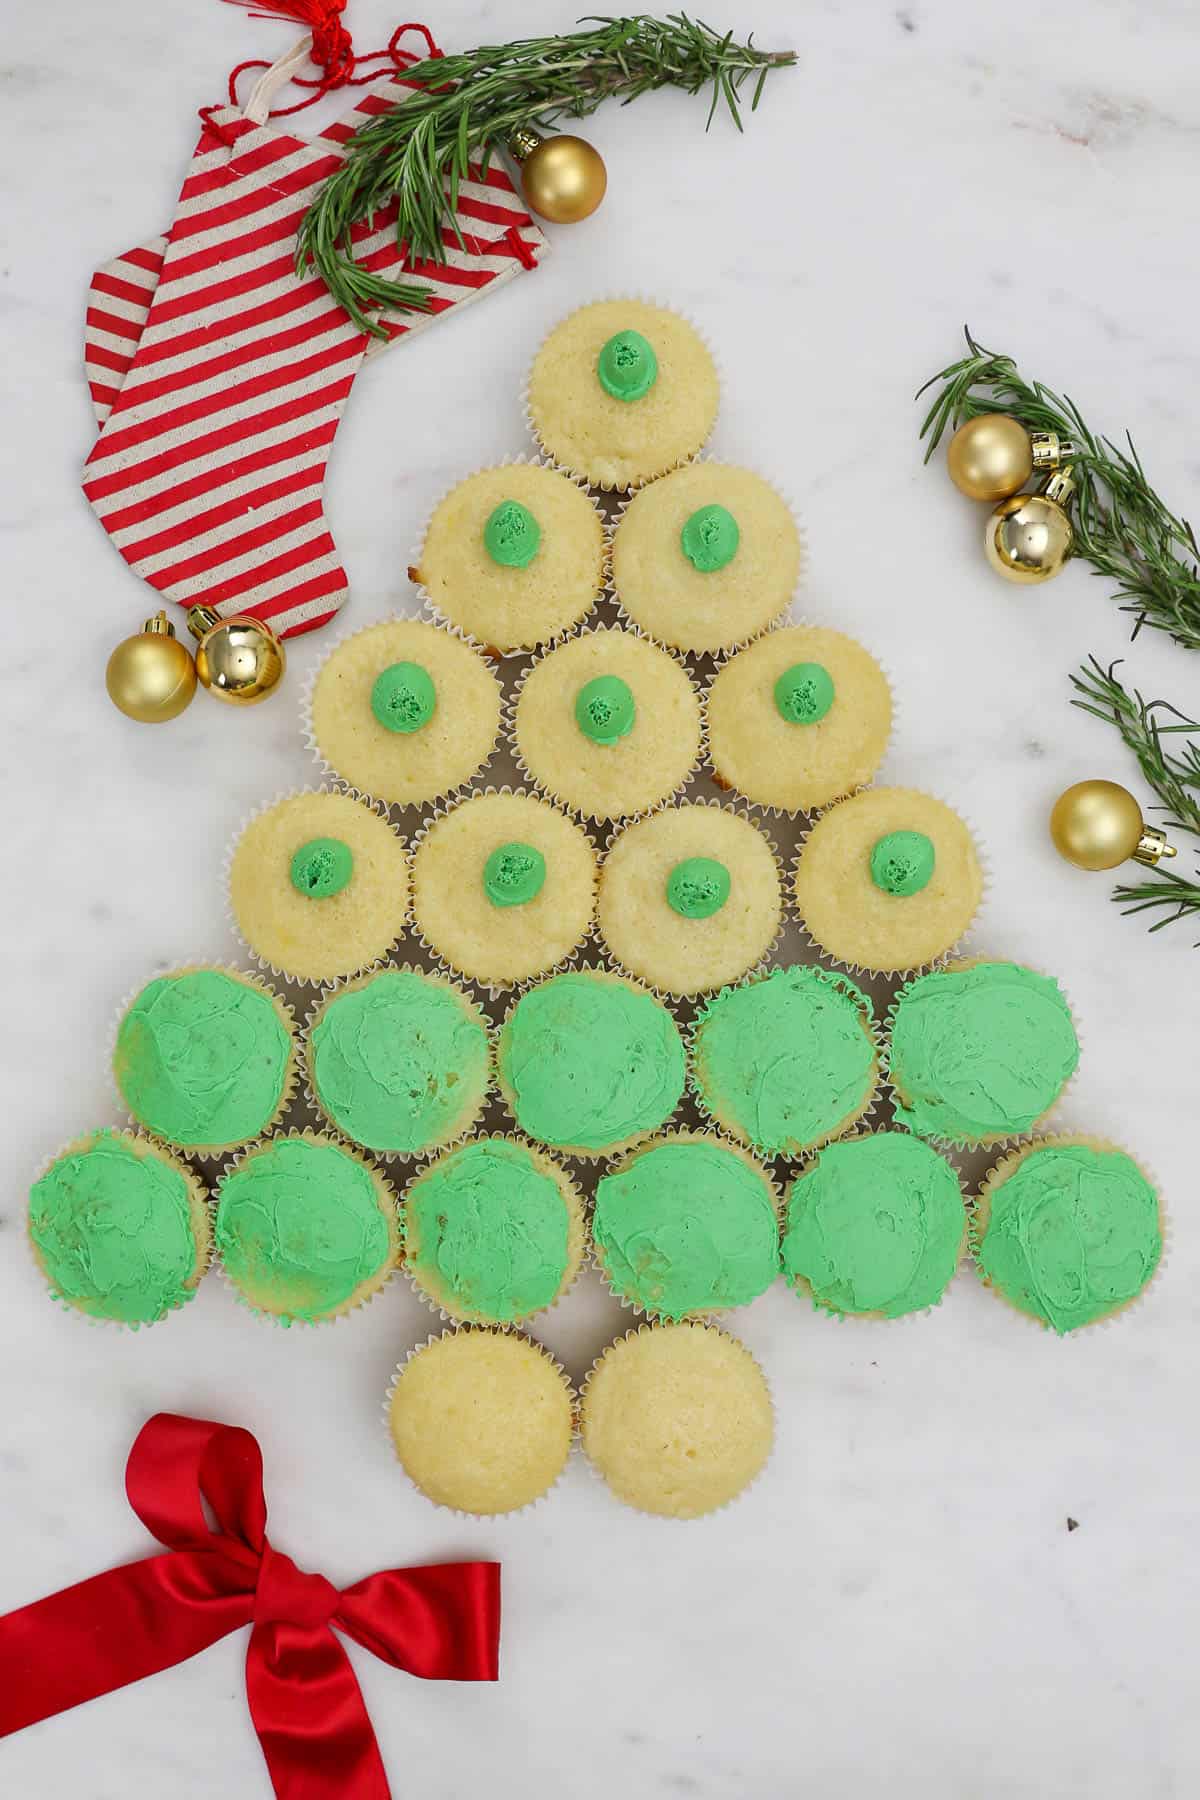 Cupcakes assembled in a Christmas tree shape with a thin layer of green buttercream spread onto eleven of them